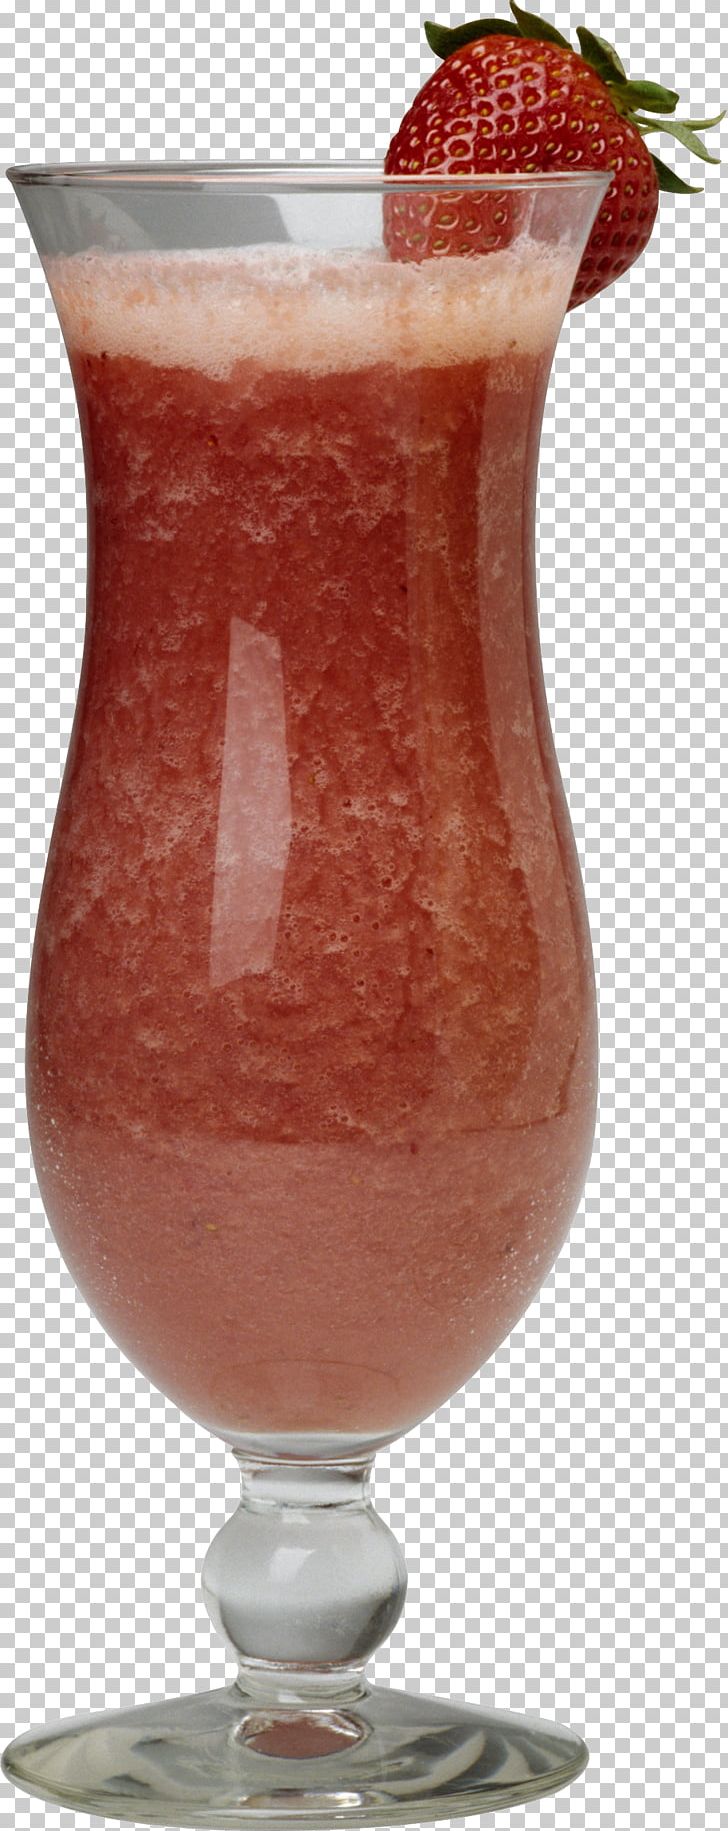 Cocktail Strawberry Juice Rum Fizzy Drinks PNG, Clipart, Batida, Beer, Cocktail, Cocktail Garnish, Daiquiri Free PNG Download